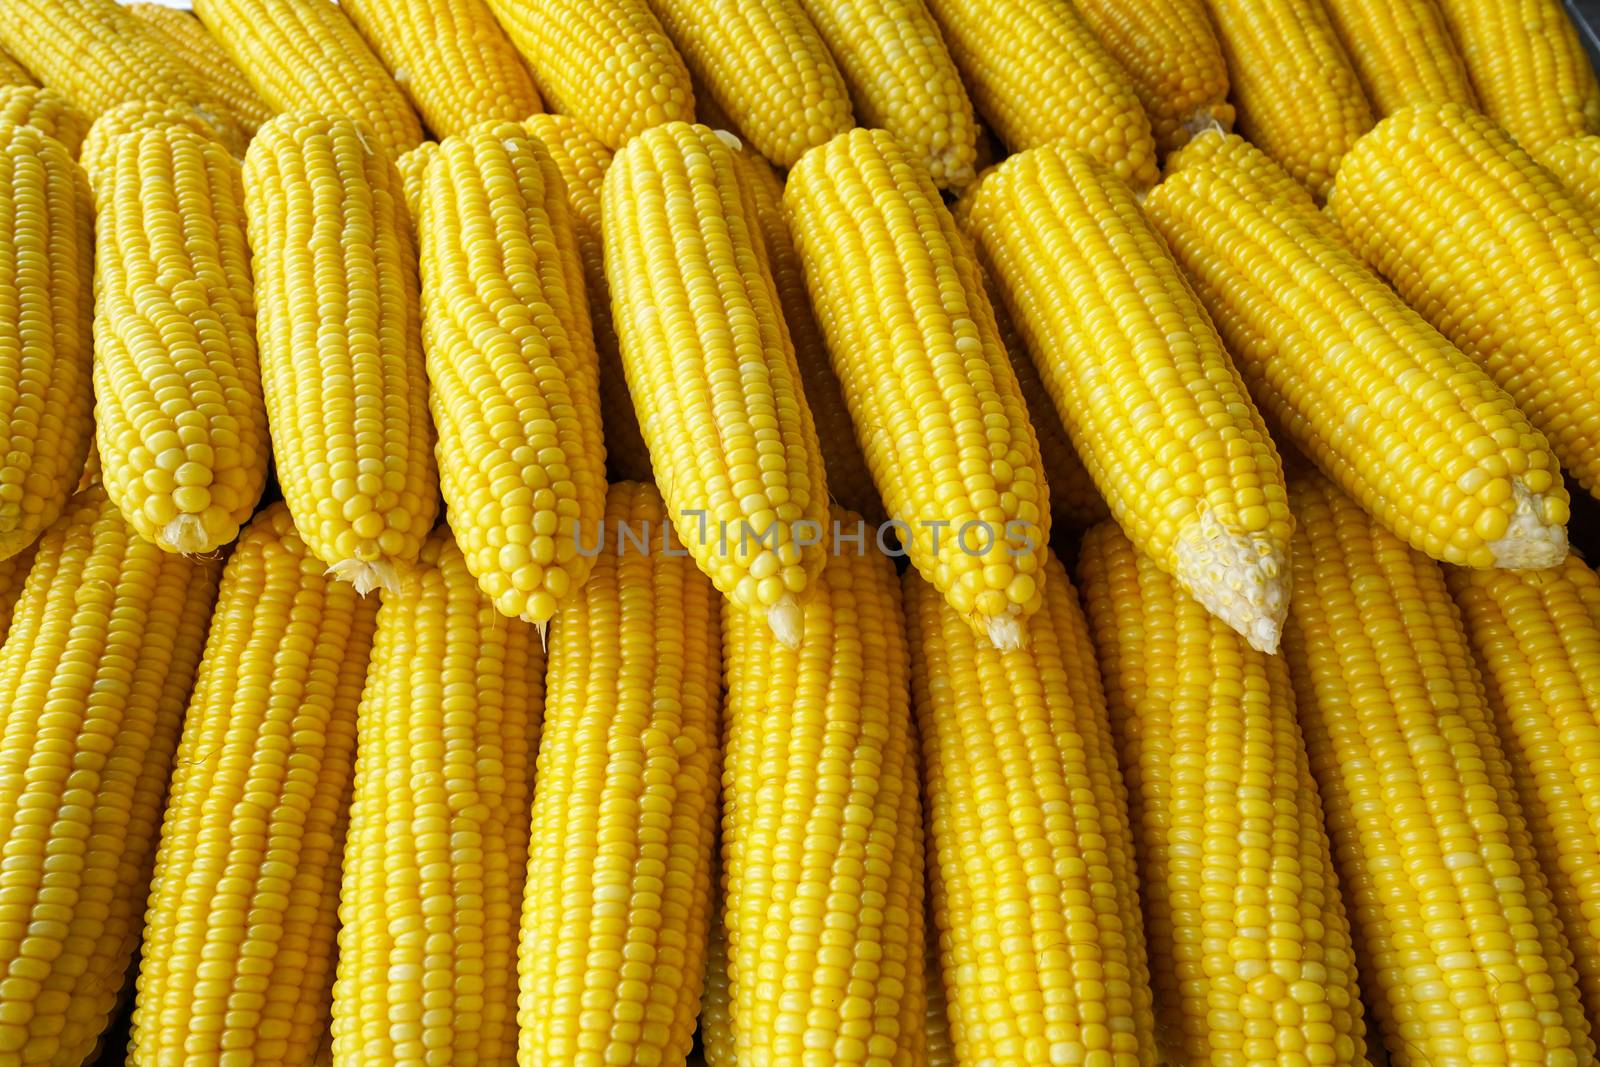 row of boil corn in the market